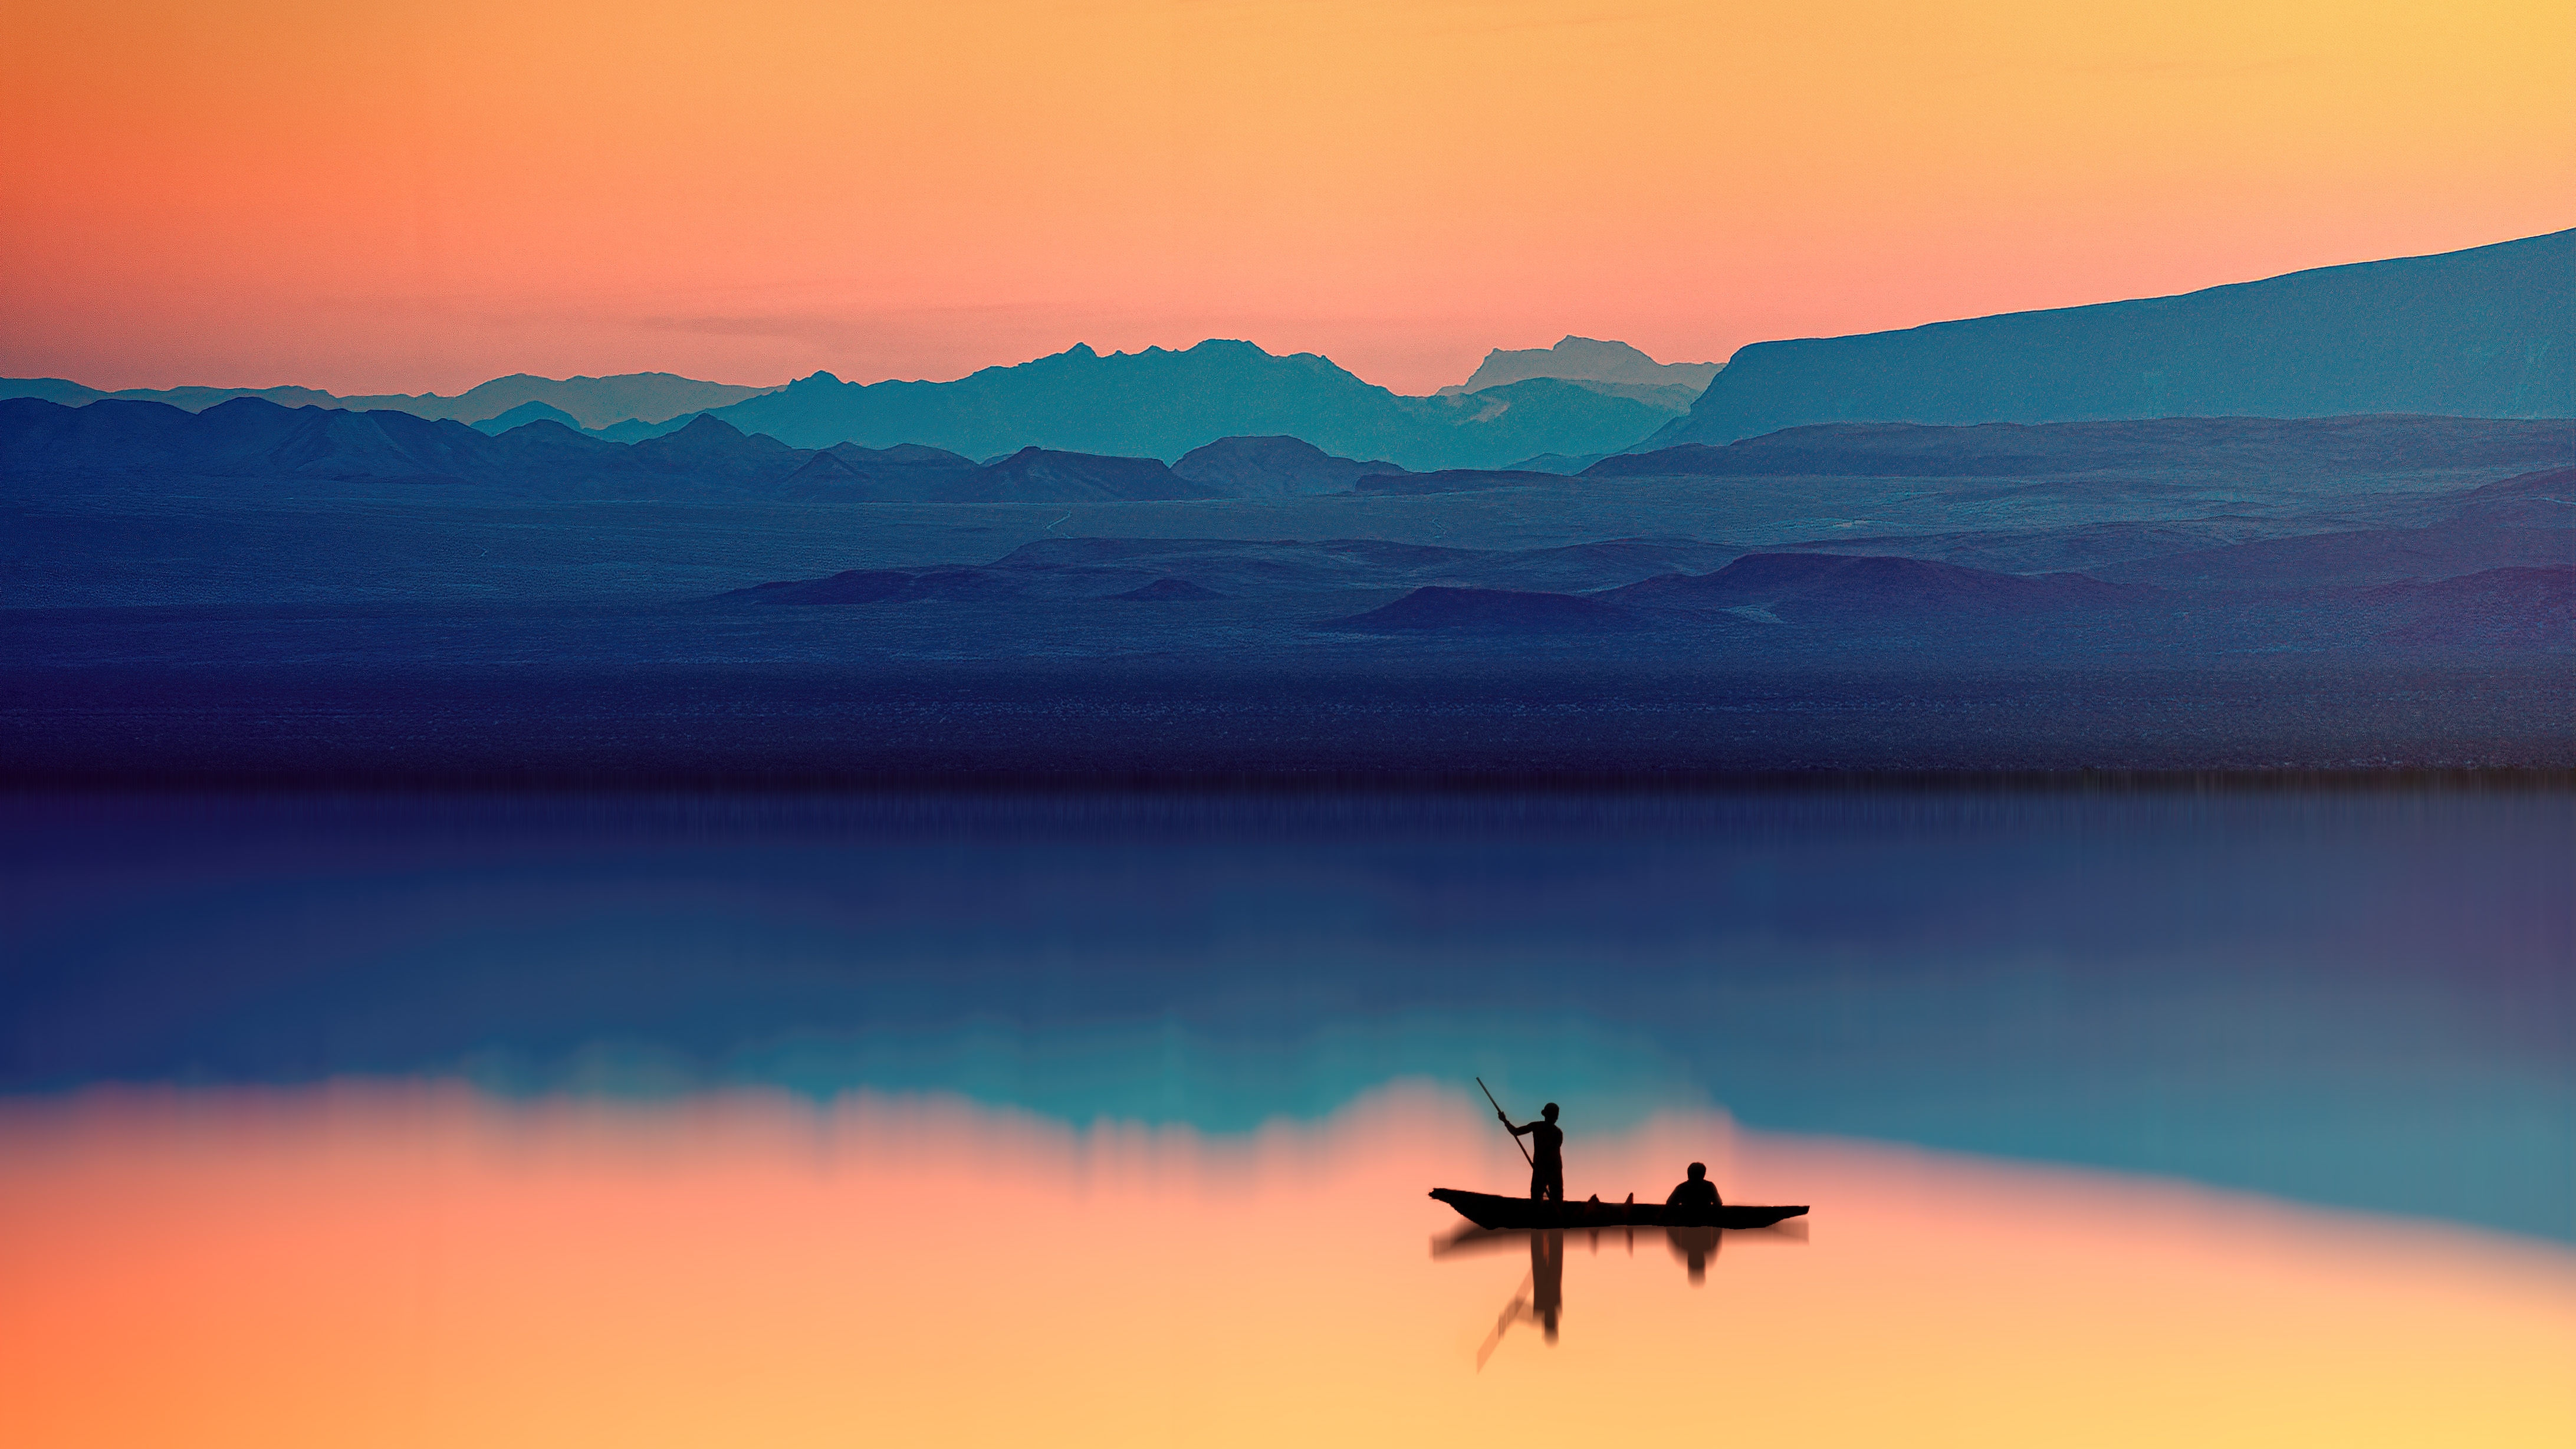 HD wallpaper, Evening, Mountains, Aesthetic, Dusk, Lake, Silhouette, River, Reflection, Boating